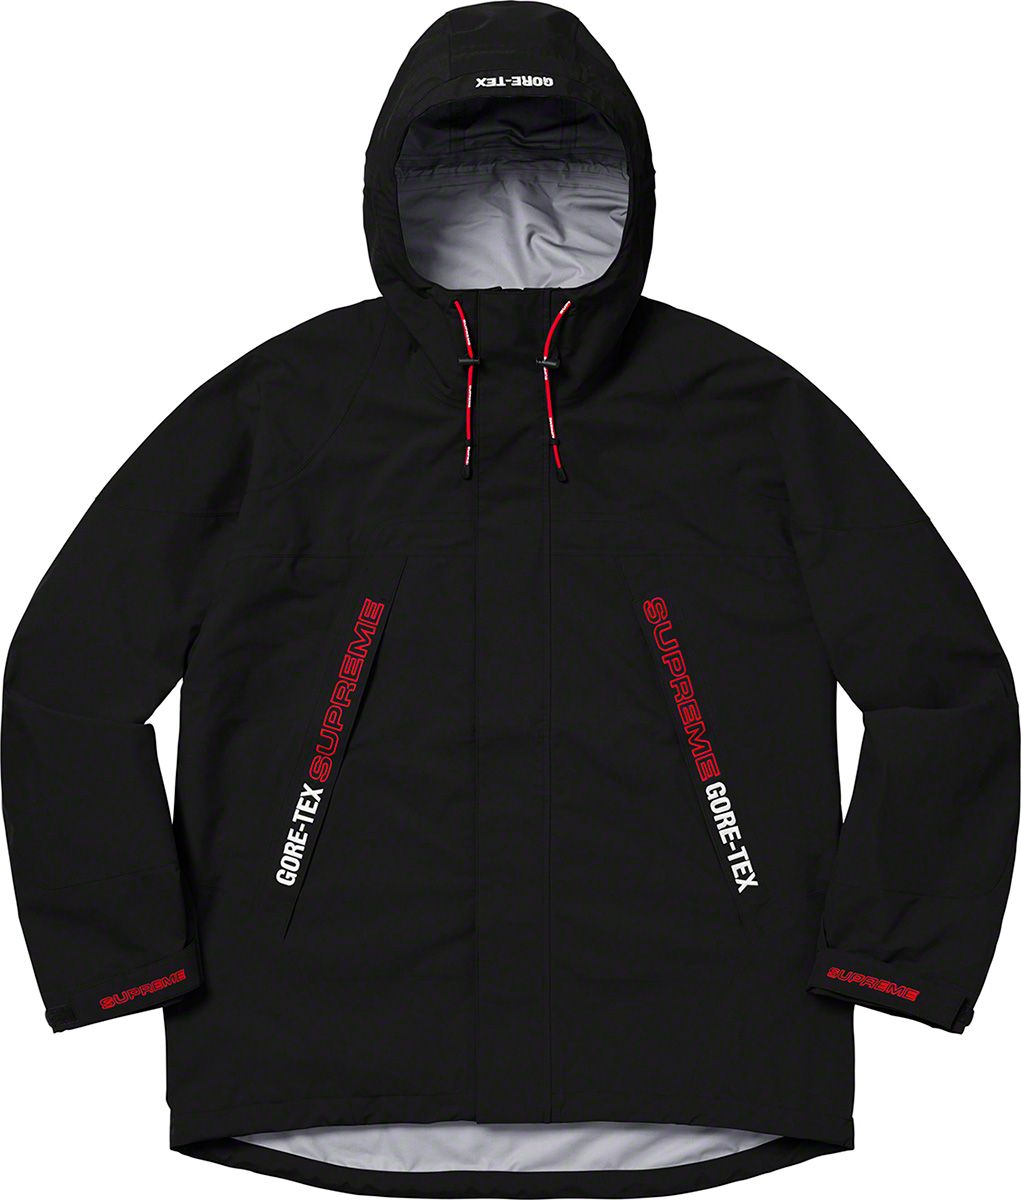 GORE-TEX Taped Seam Jacket - Fall/Winter 2019 Preview – Supreme